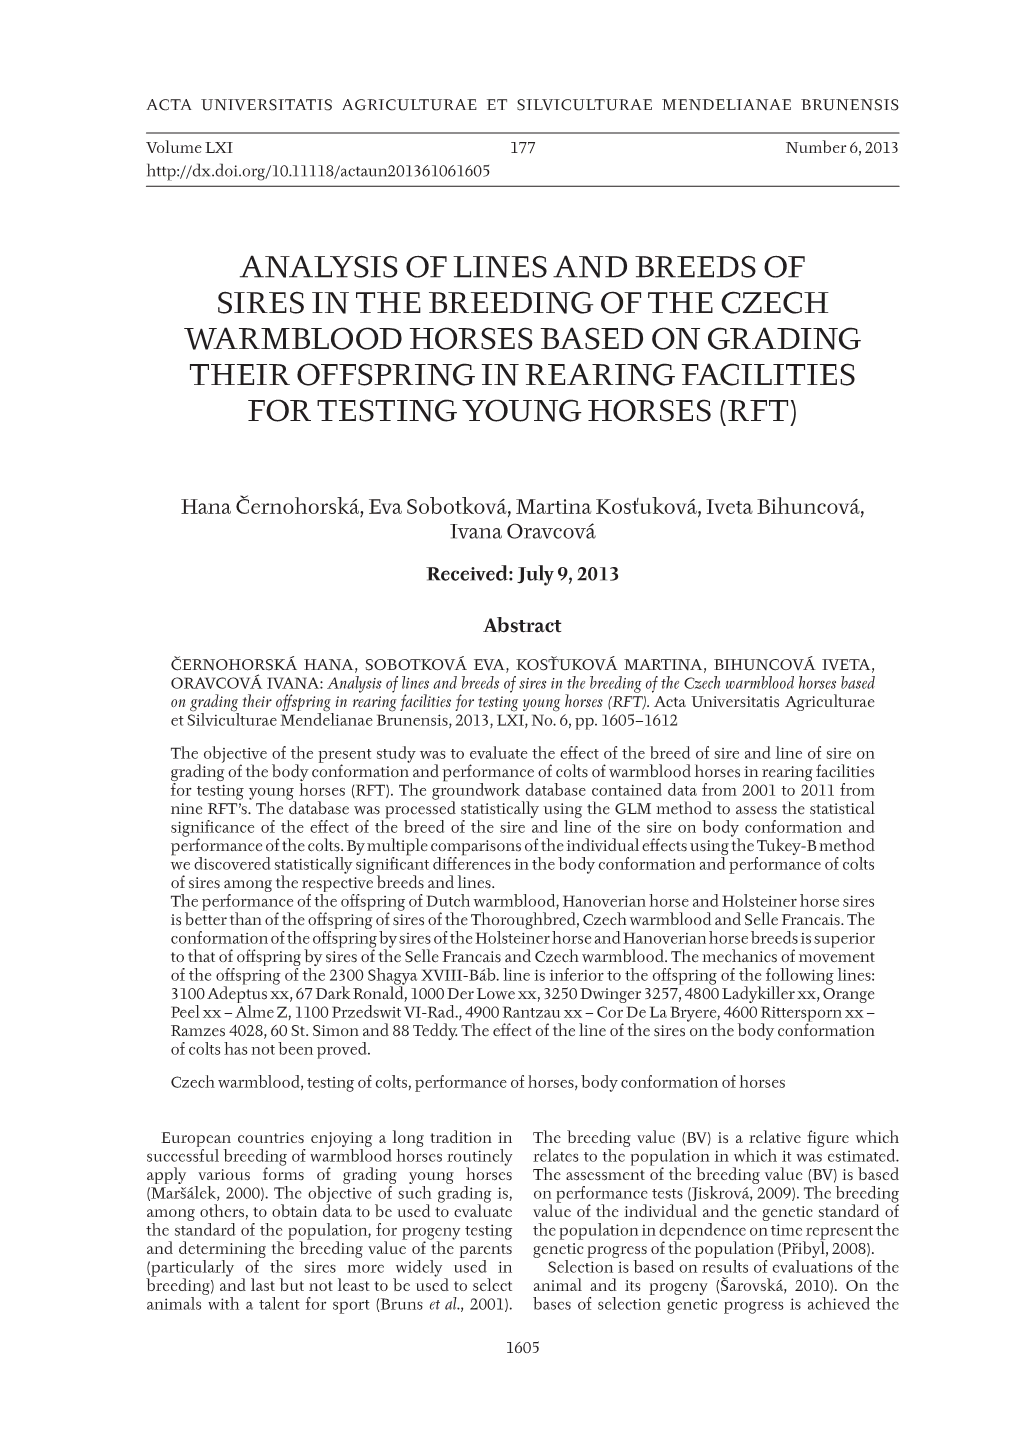 Analysis of Lines and Breeds of Sires in the Breeding of the Czech Warmblood Horses Based on Grading Their Offspring in Rearing Facilities